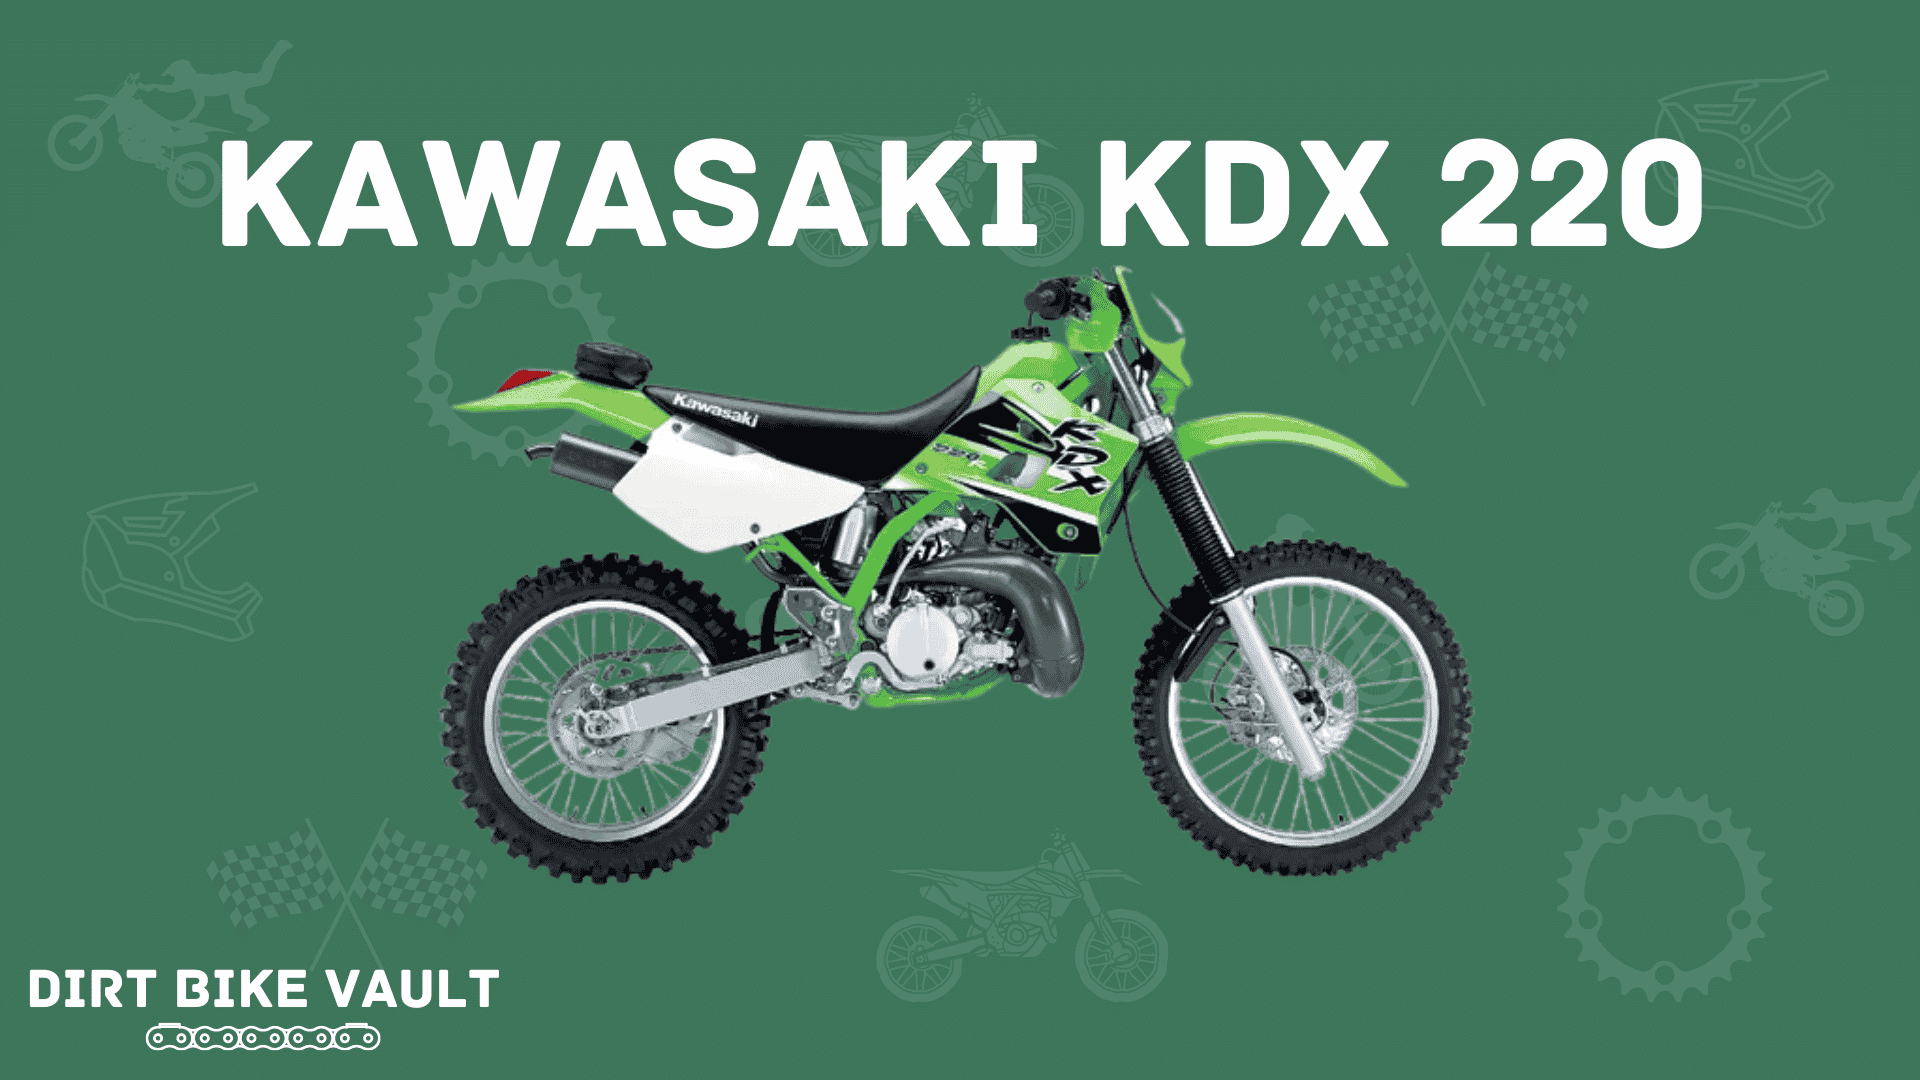 Kawasaki KDX 220 in white text with image of KDX220 dirt bike on green background